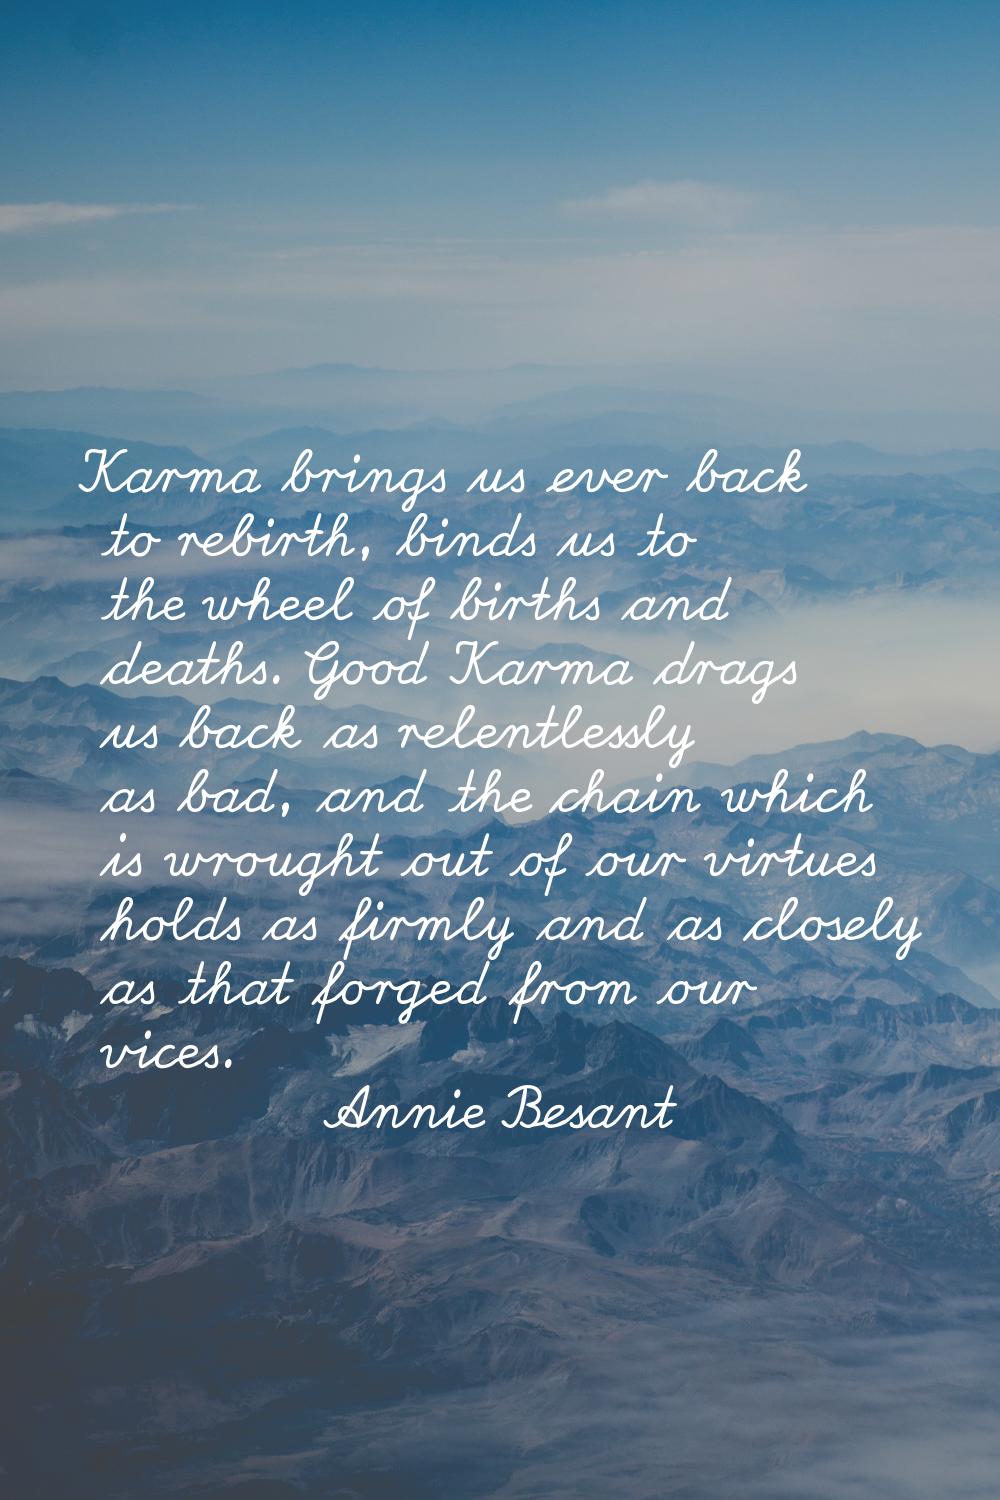 Karma brings us ever back to rebirth, binds us to the wheel of births and deaths. Good Karma drags 